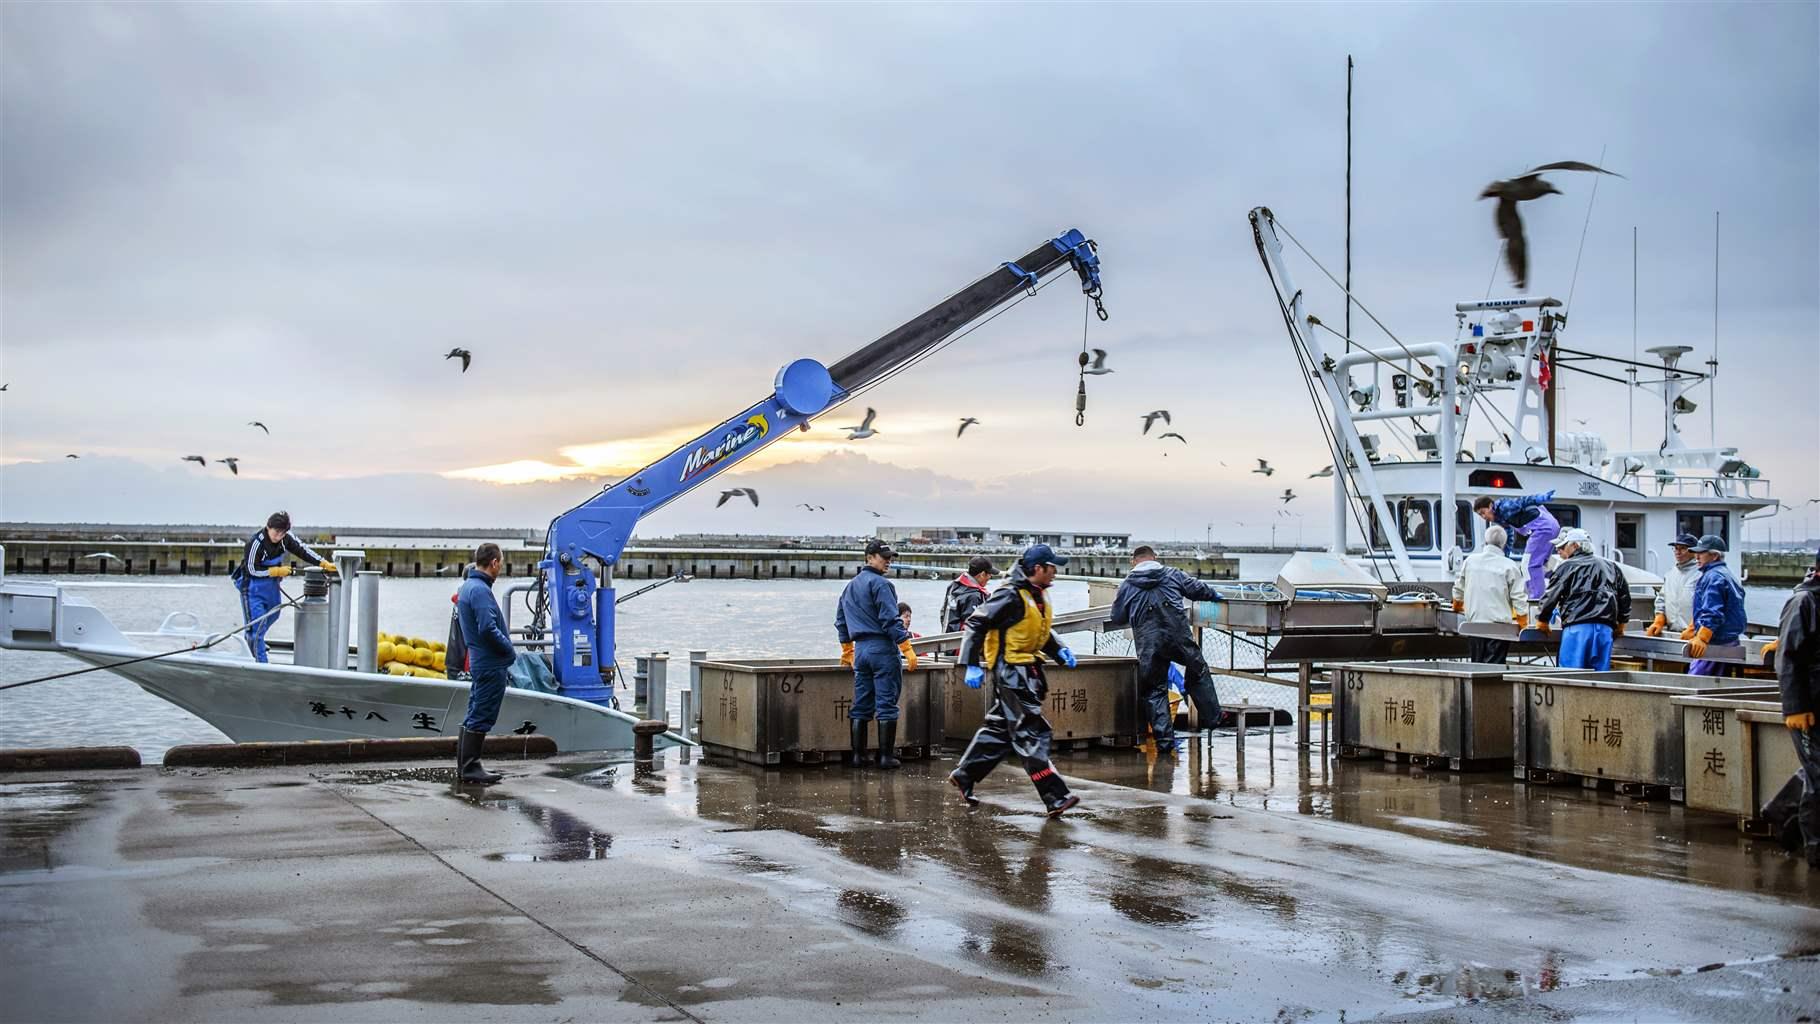 On a cloudy day at sunrise, a dozen men offload catch from a white fishing vessel onto the dock in Hokkaido Island, Japan. A smaller white boat with a blue crane waits nearby to help lift heavy loads. 